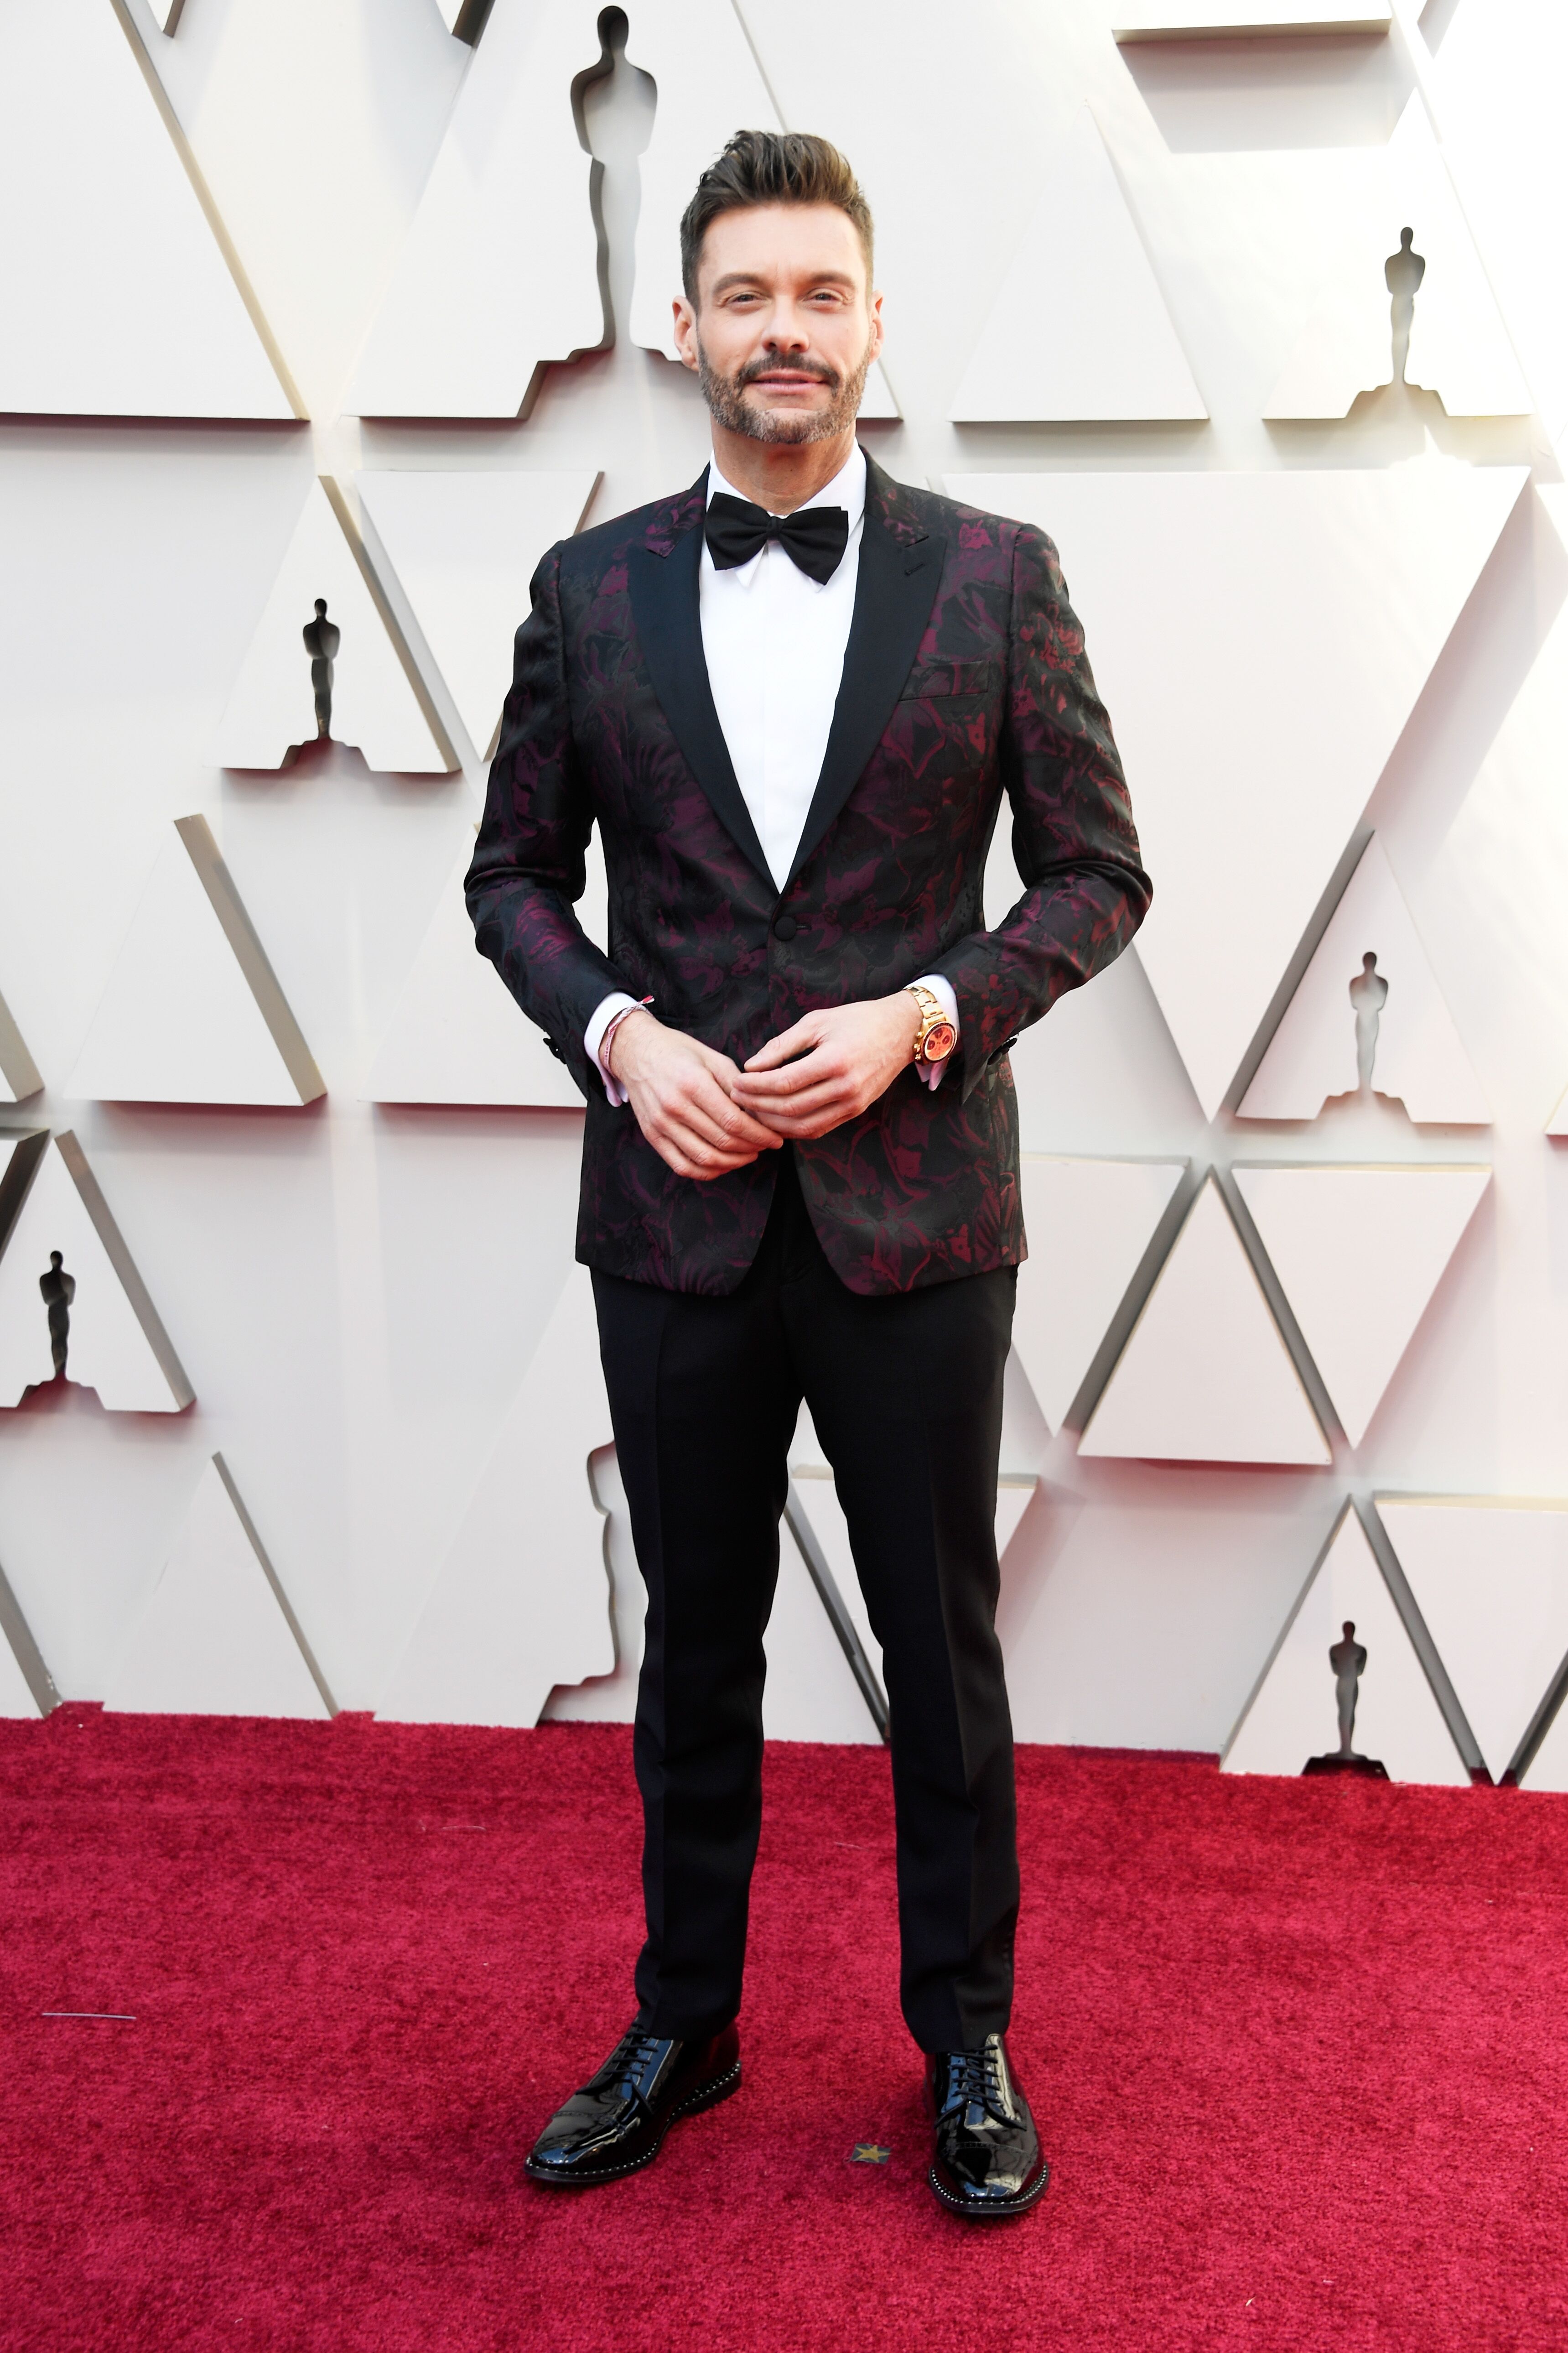 Ryan Seacrest at the 91st Annual Academy Awards. | Source: Getty Images